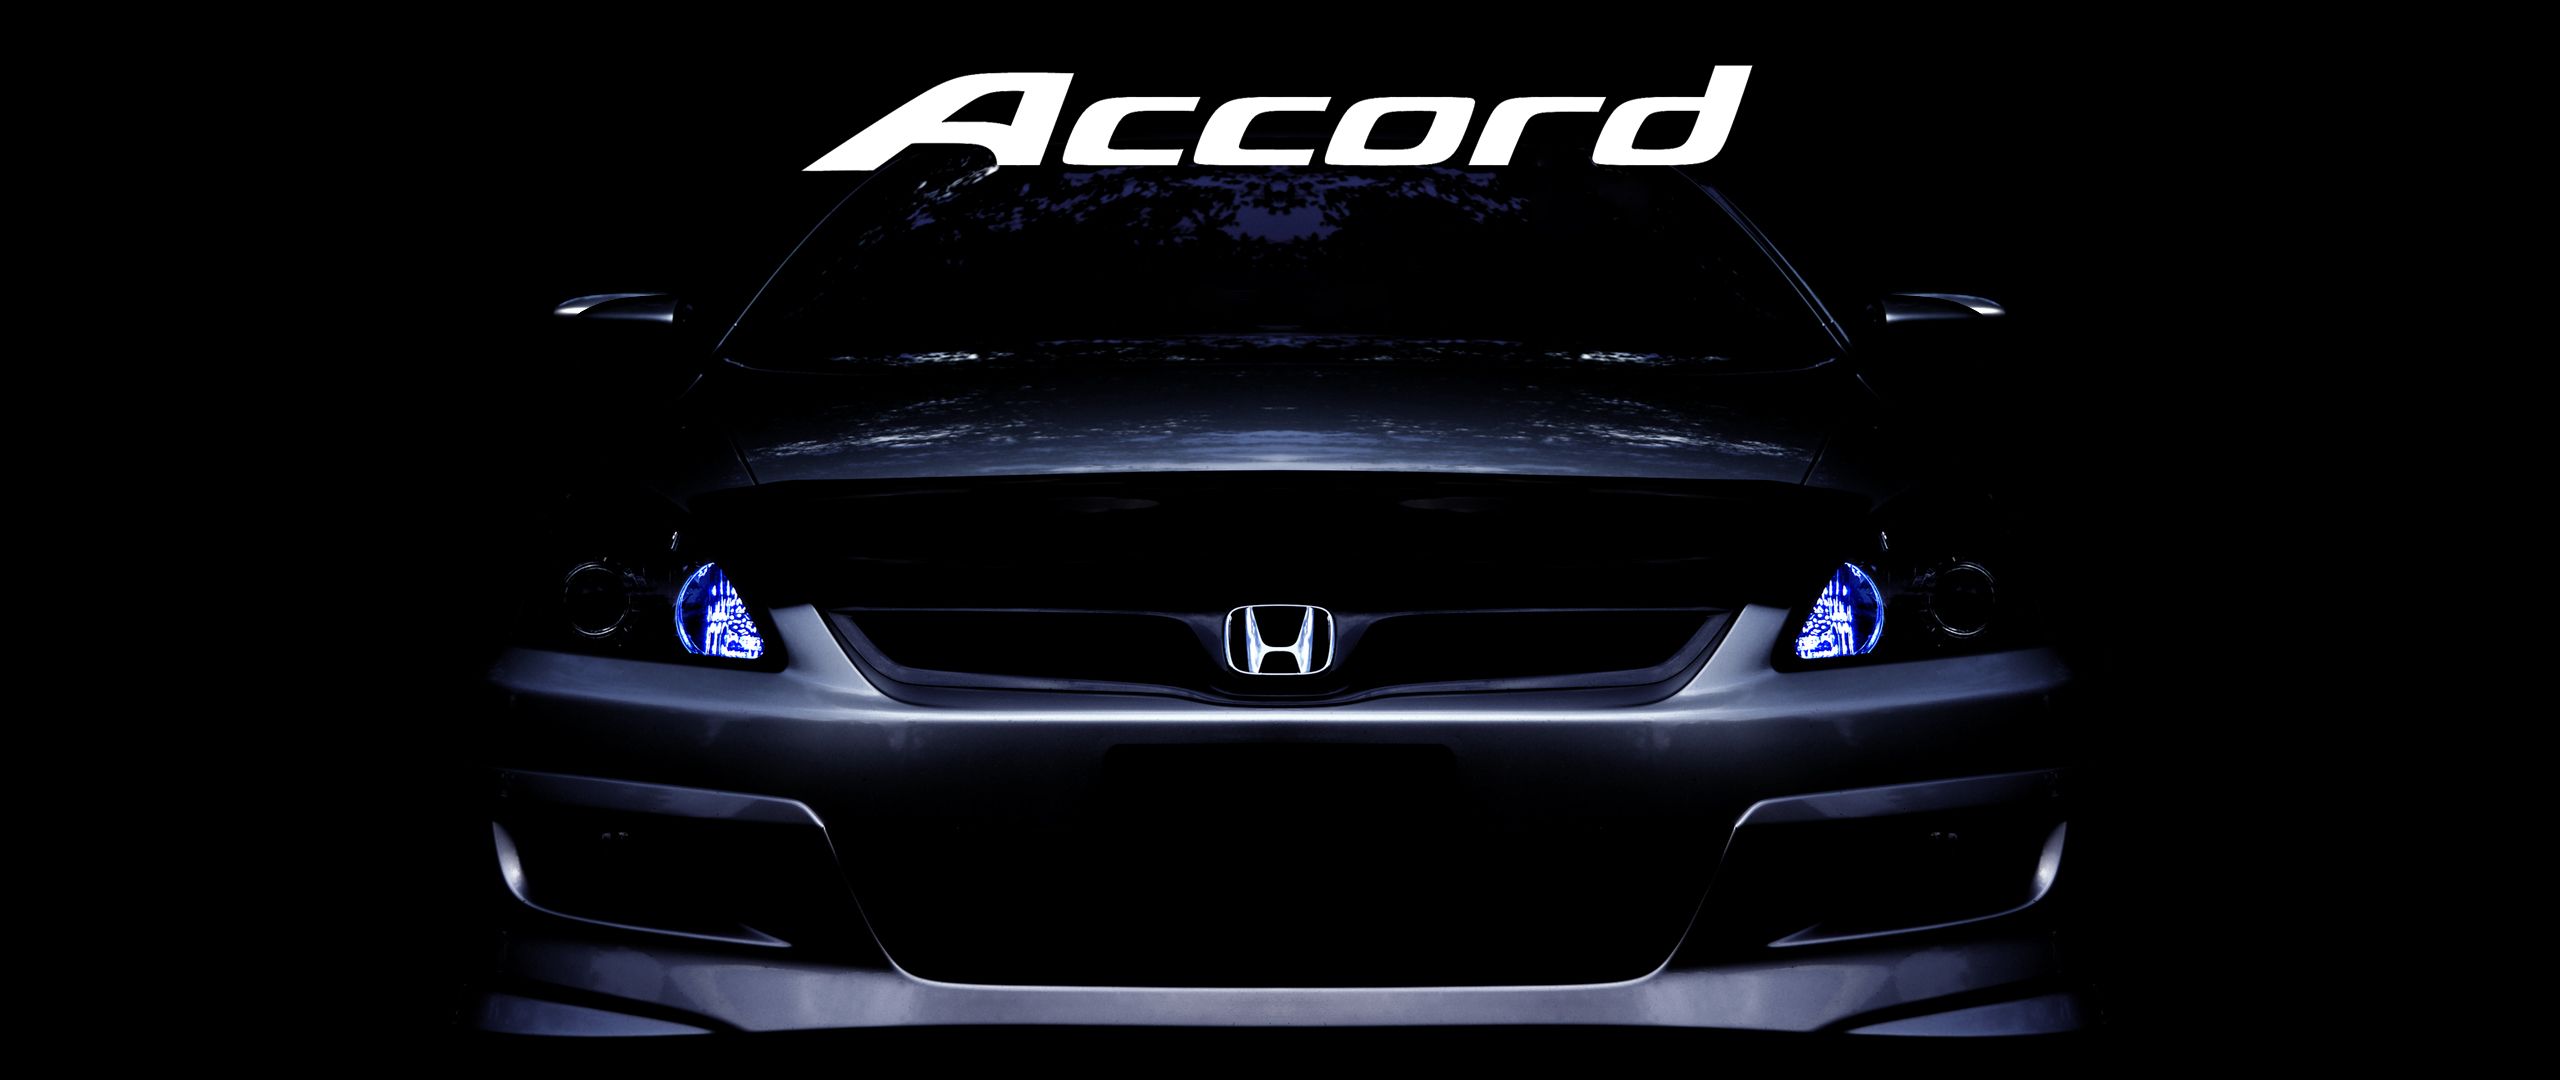 Accord Wallpapers